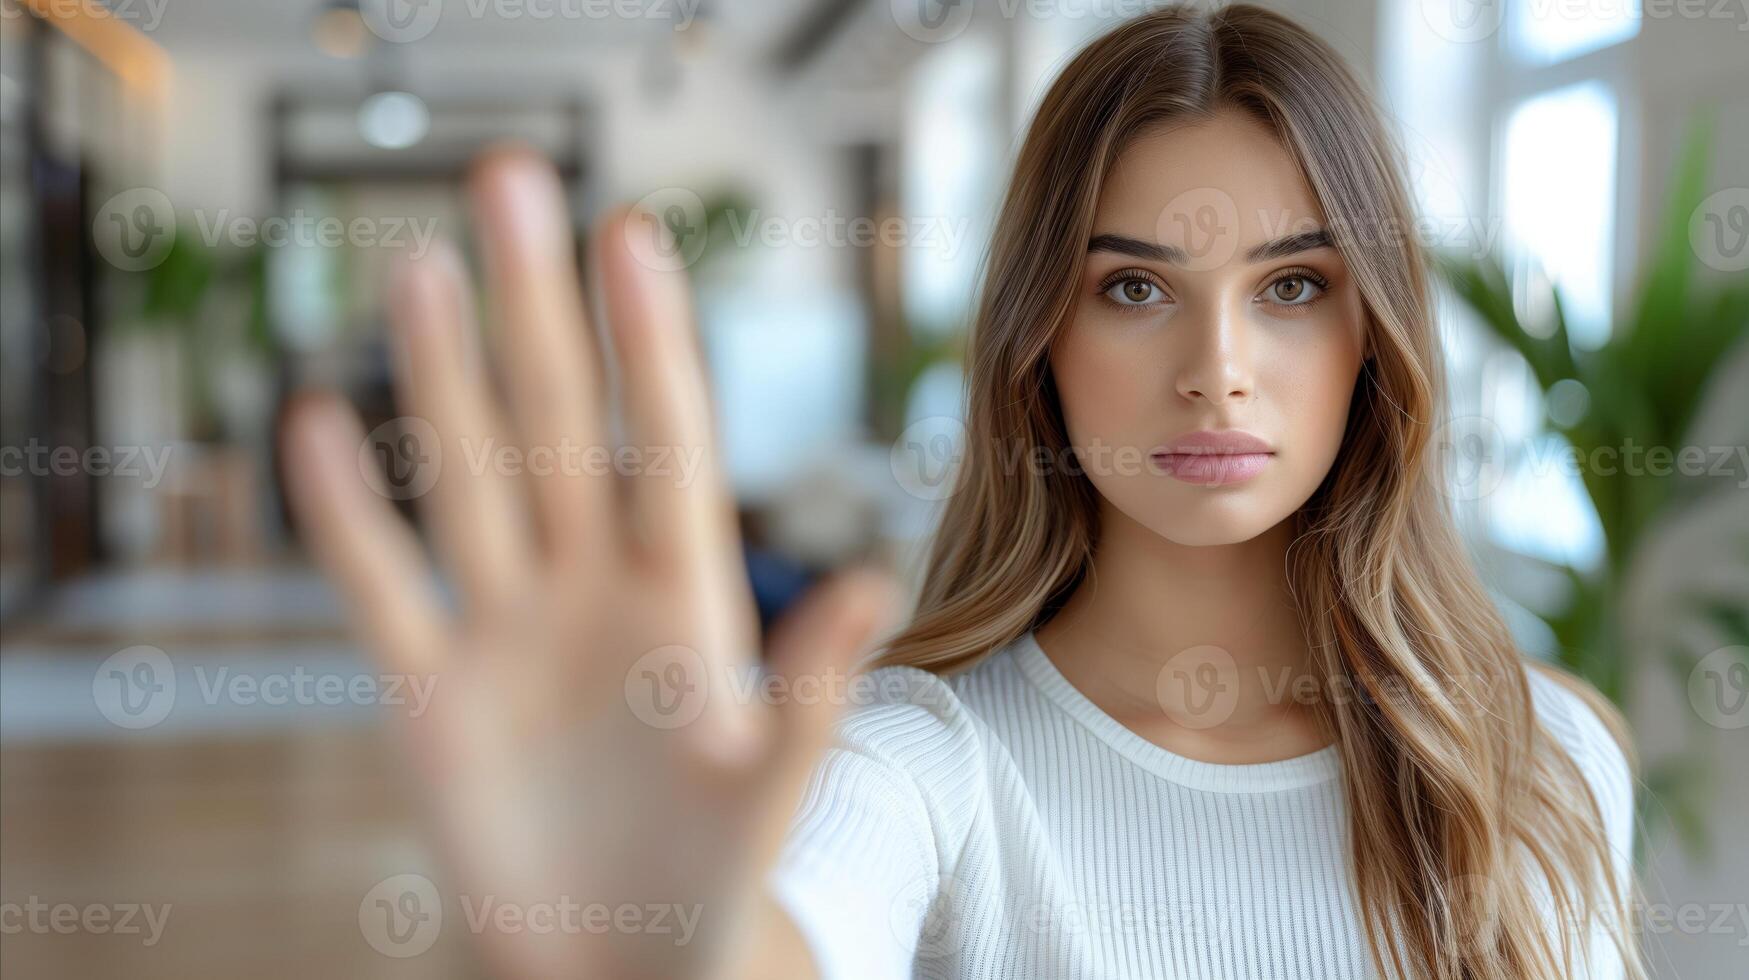 Young Woman Gesturing Stop With Hand Indoors During Daytime photo